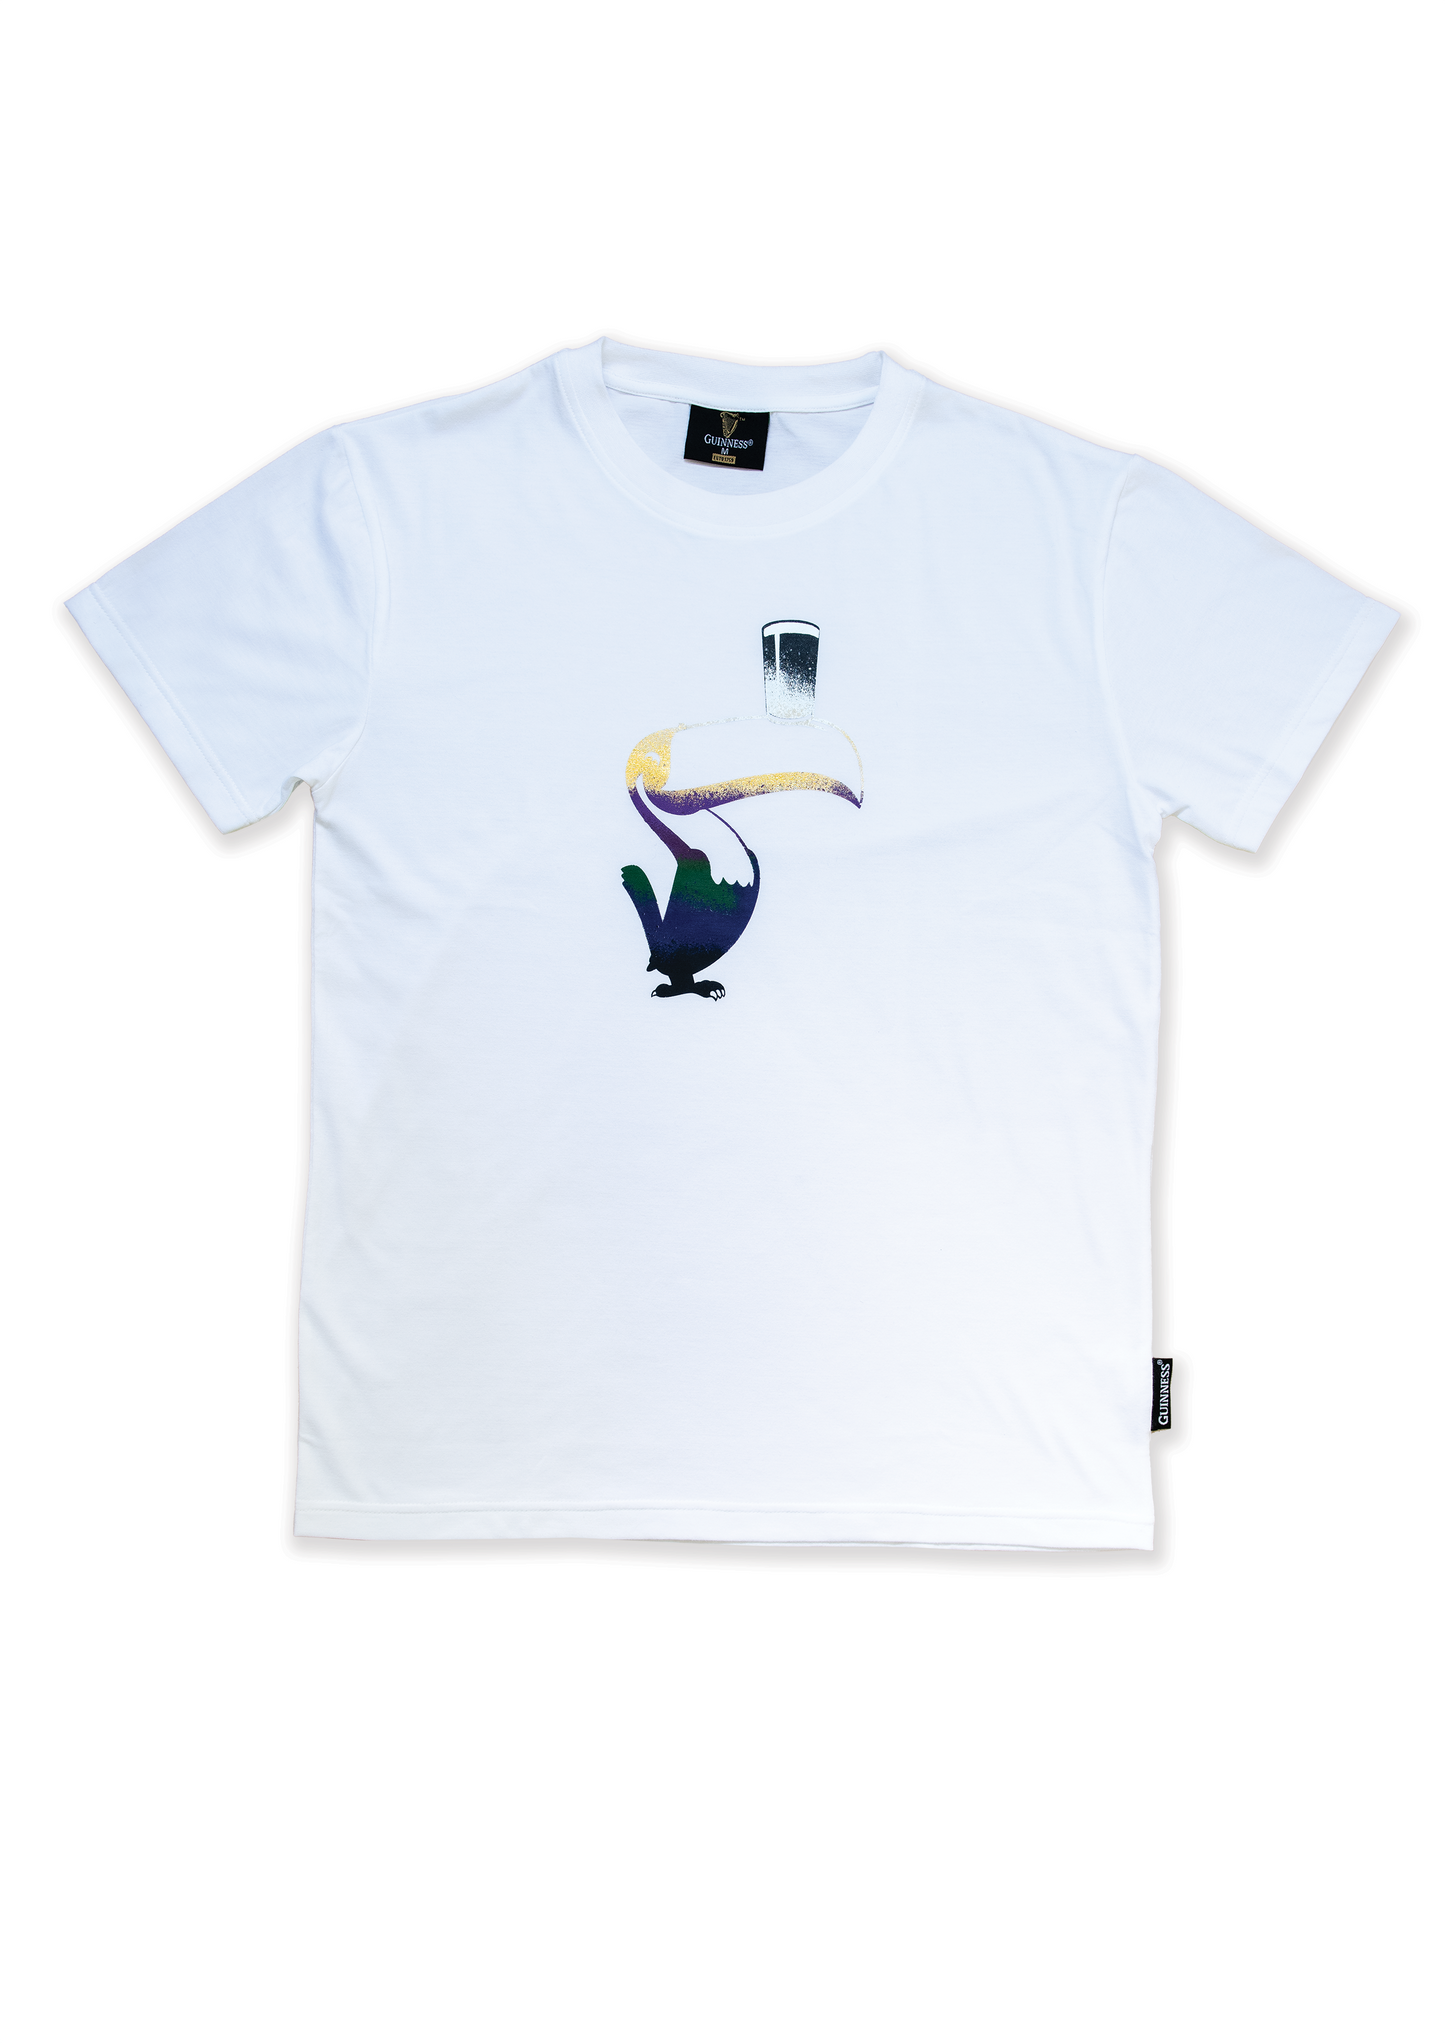 A white short sleeve Guinness Liquid Toucan Tee with an image of a Guinness Toucan on it.